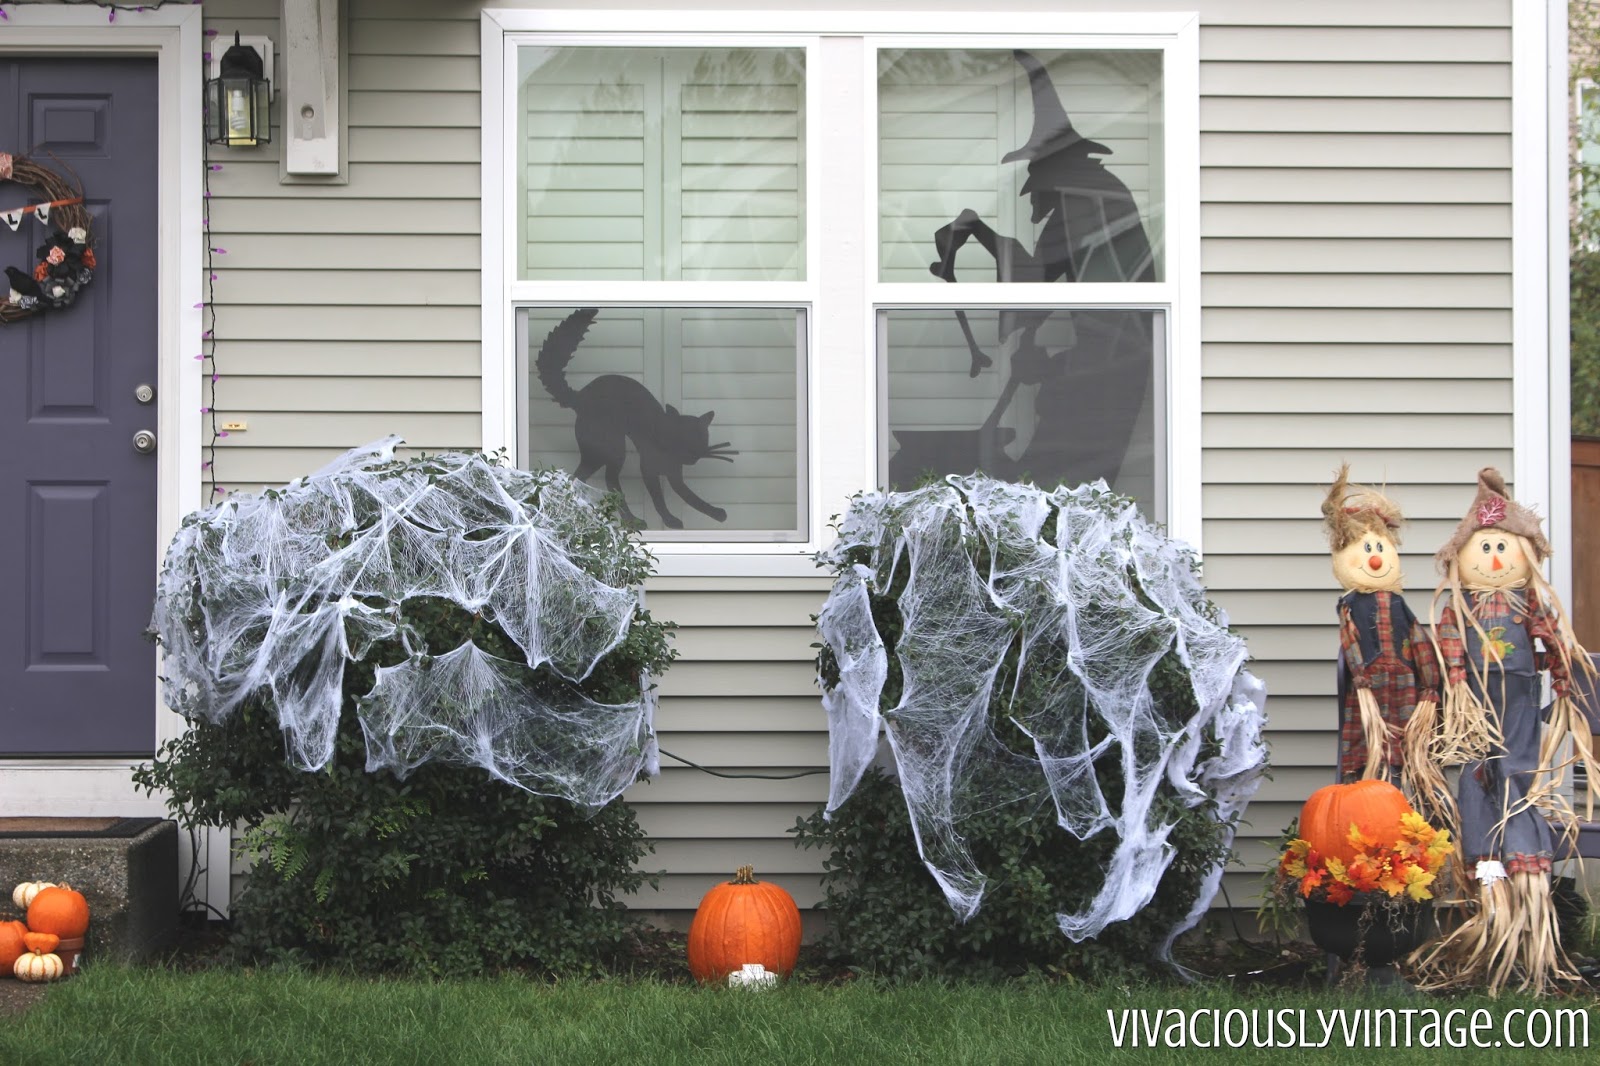 Want cheap Halloween decor? Make your own creepy Halloween window silhouettes using these FREE templates! Link to a full tutorial in the post! Pin now to make later!